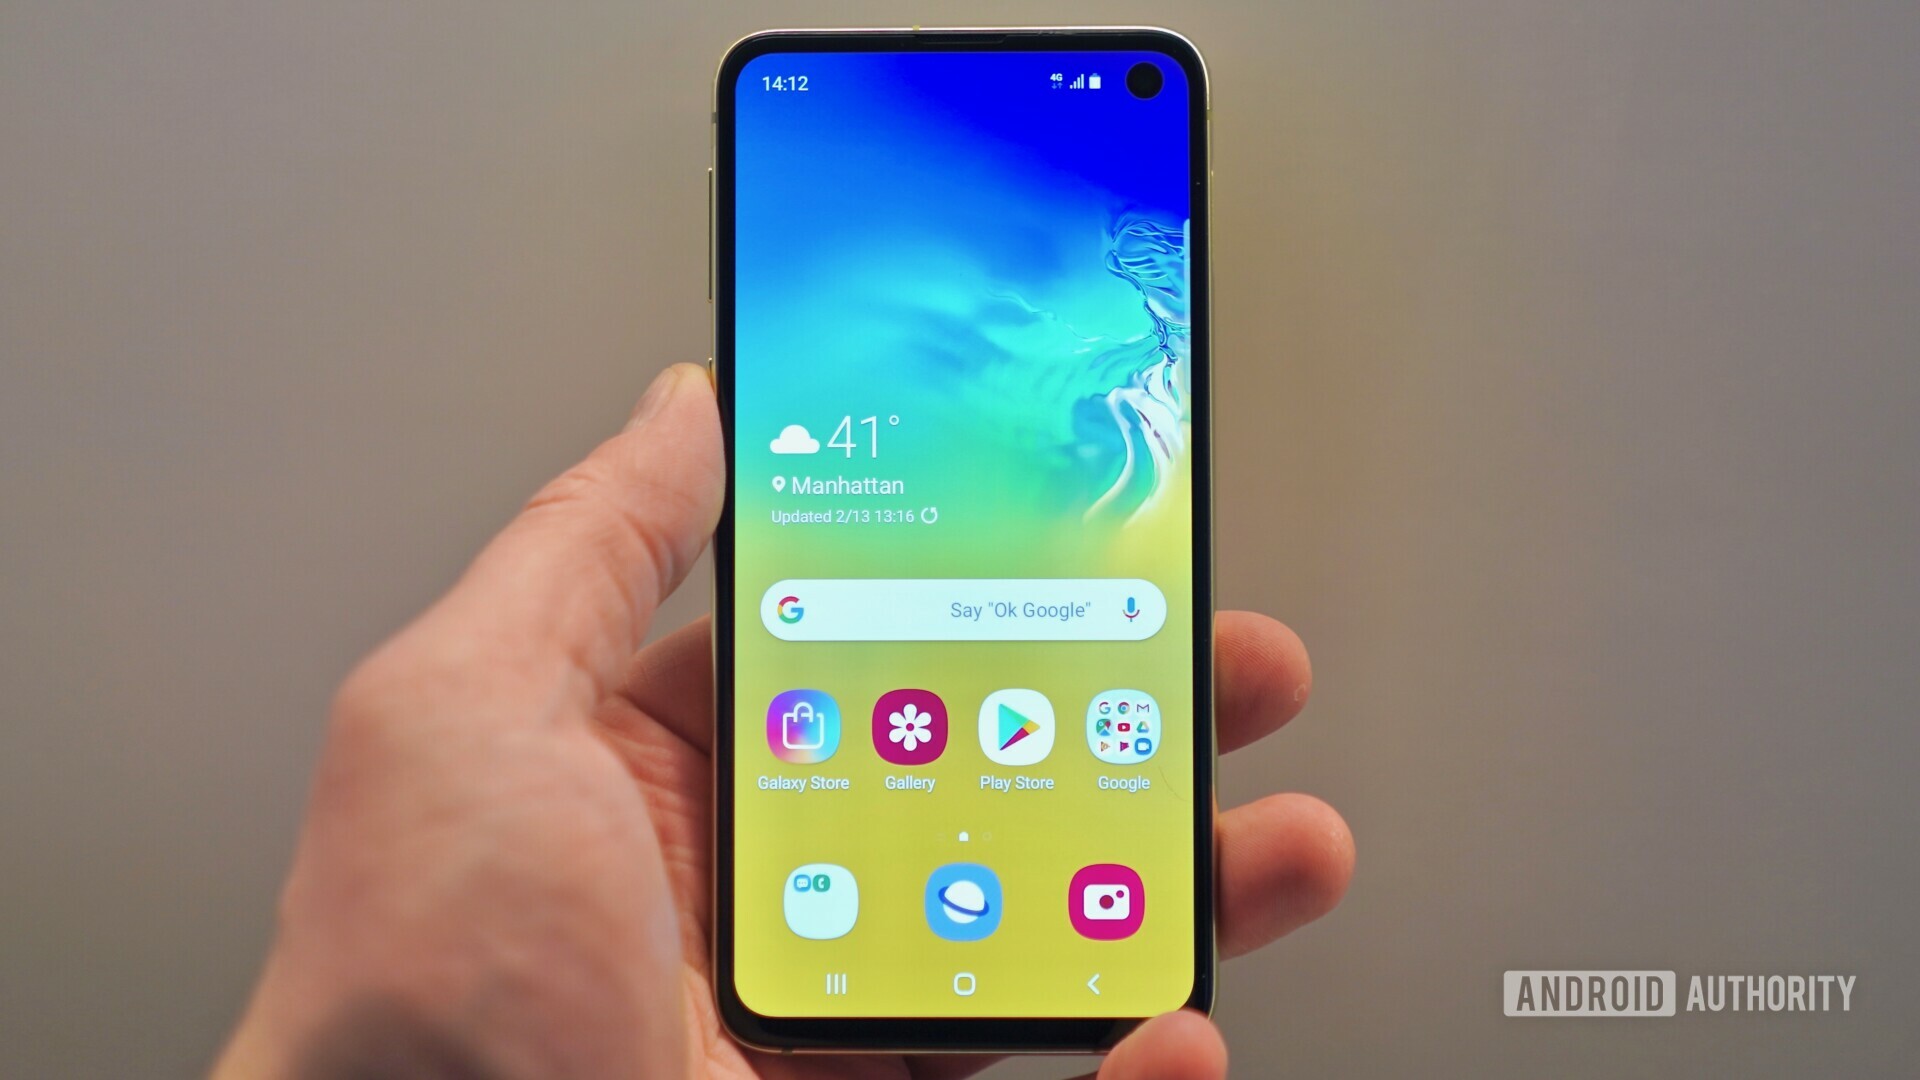 Samsung Galaxy S10e from Boost Mobile